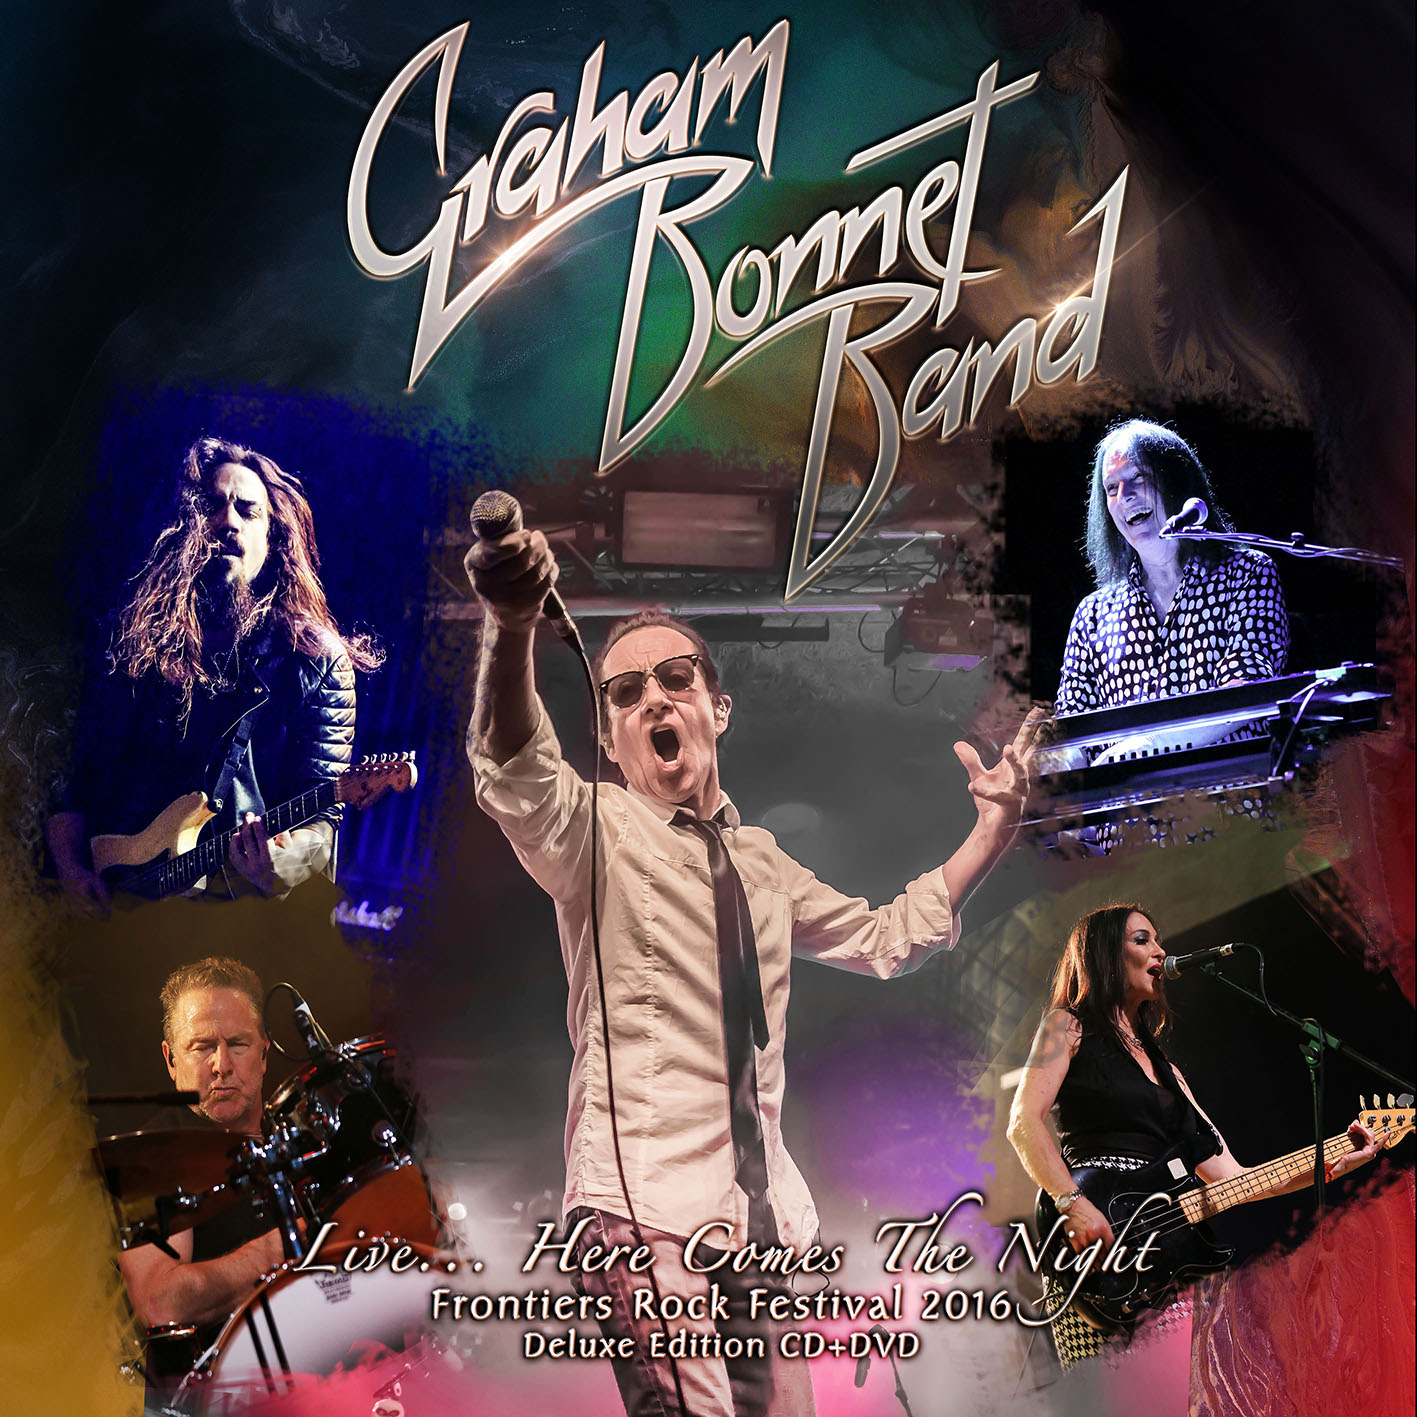 GRAHAM BONNET BAND - LIVE… HERE COMES THE NIGHT-CD+DVD